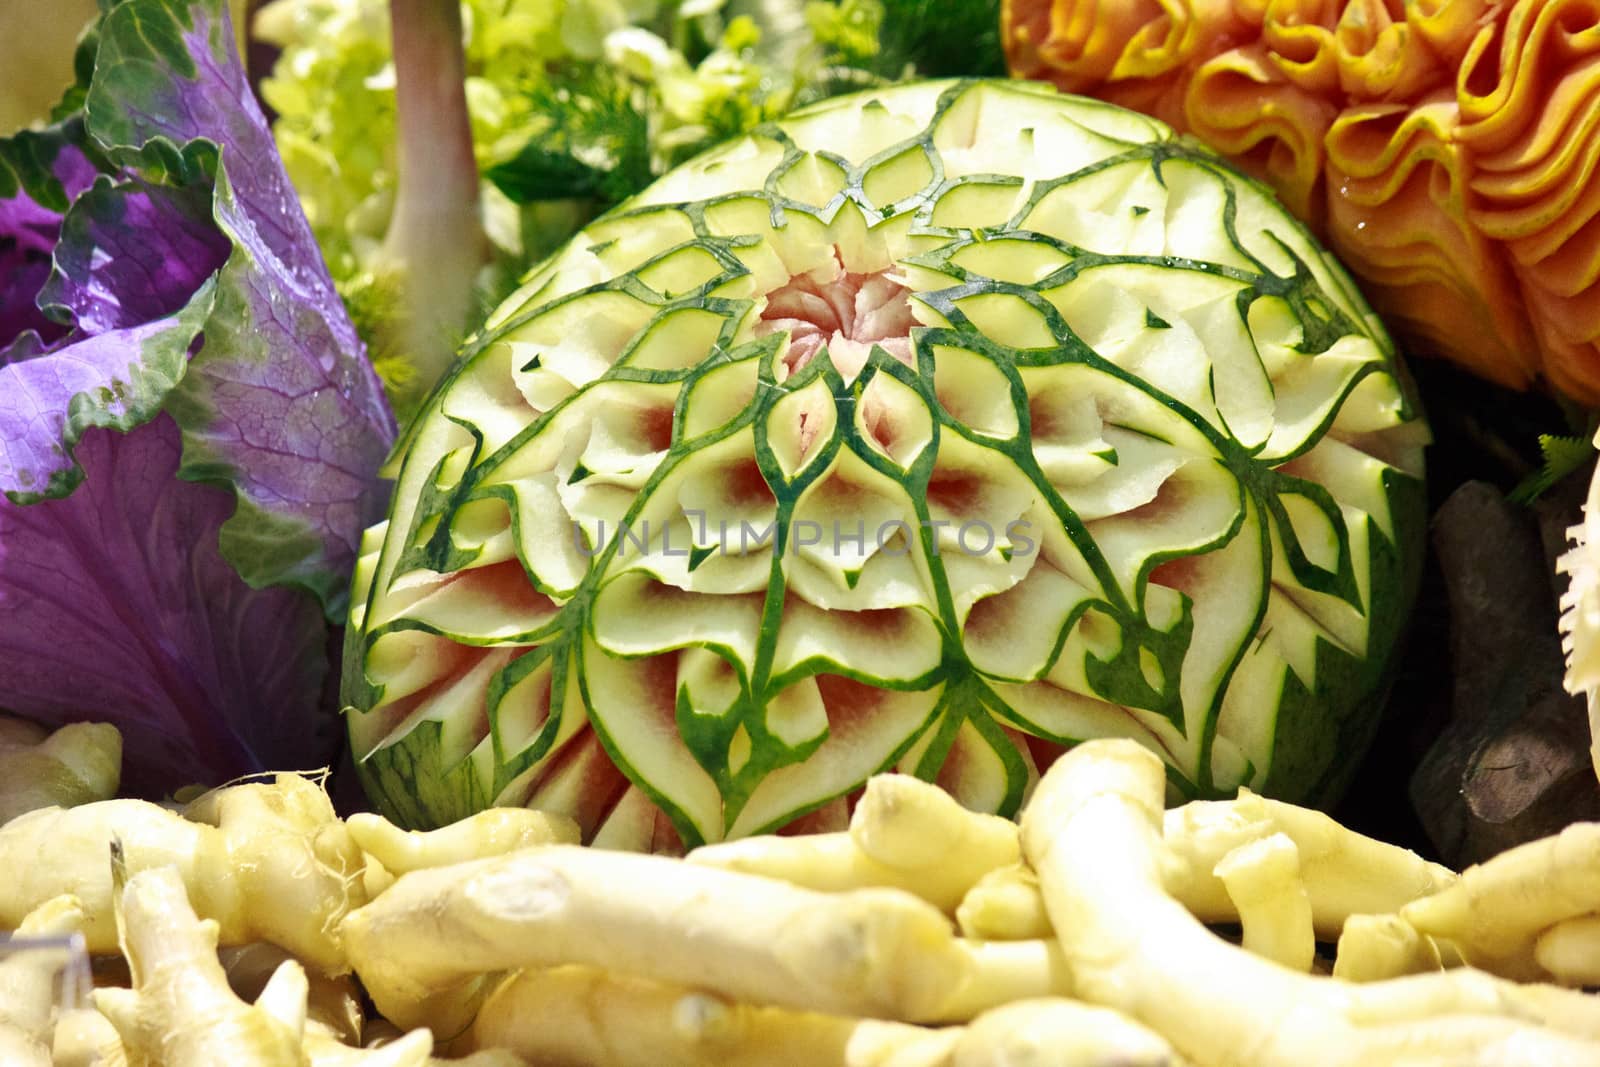 watermelon carving in the Thailand ultimate chef challenge 2013